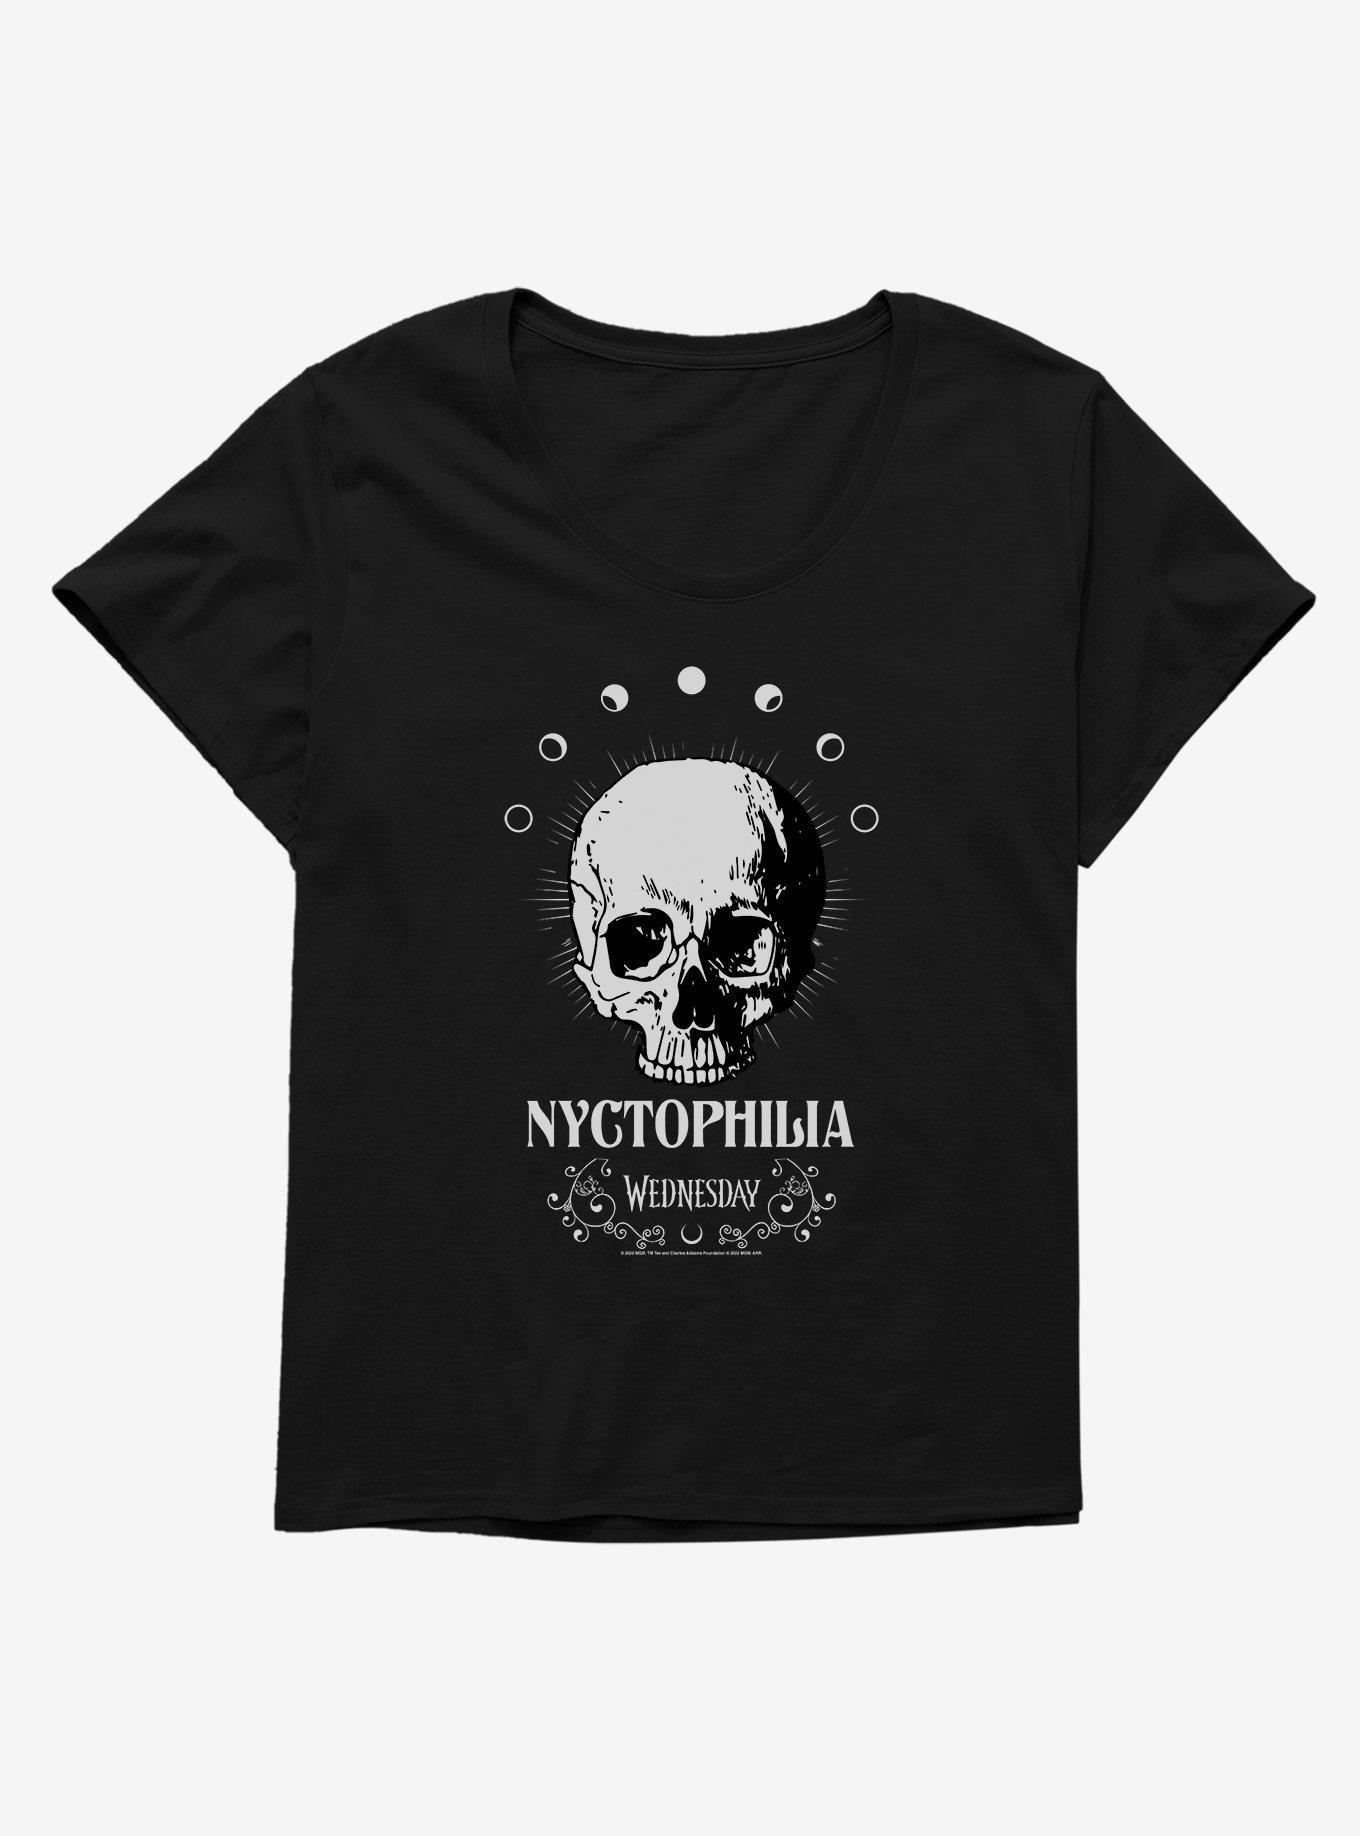 Wednesday Nyctophilia Womens T-Shirt Plus Size, BLACK, hi-res